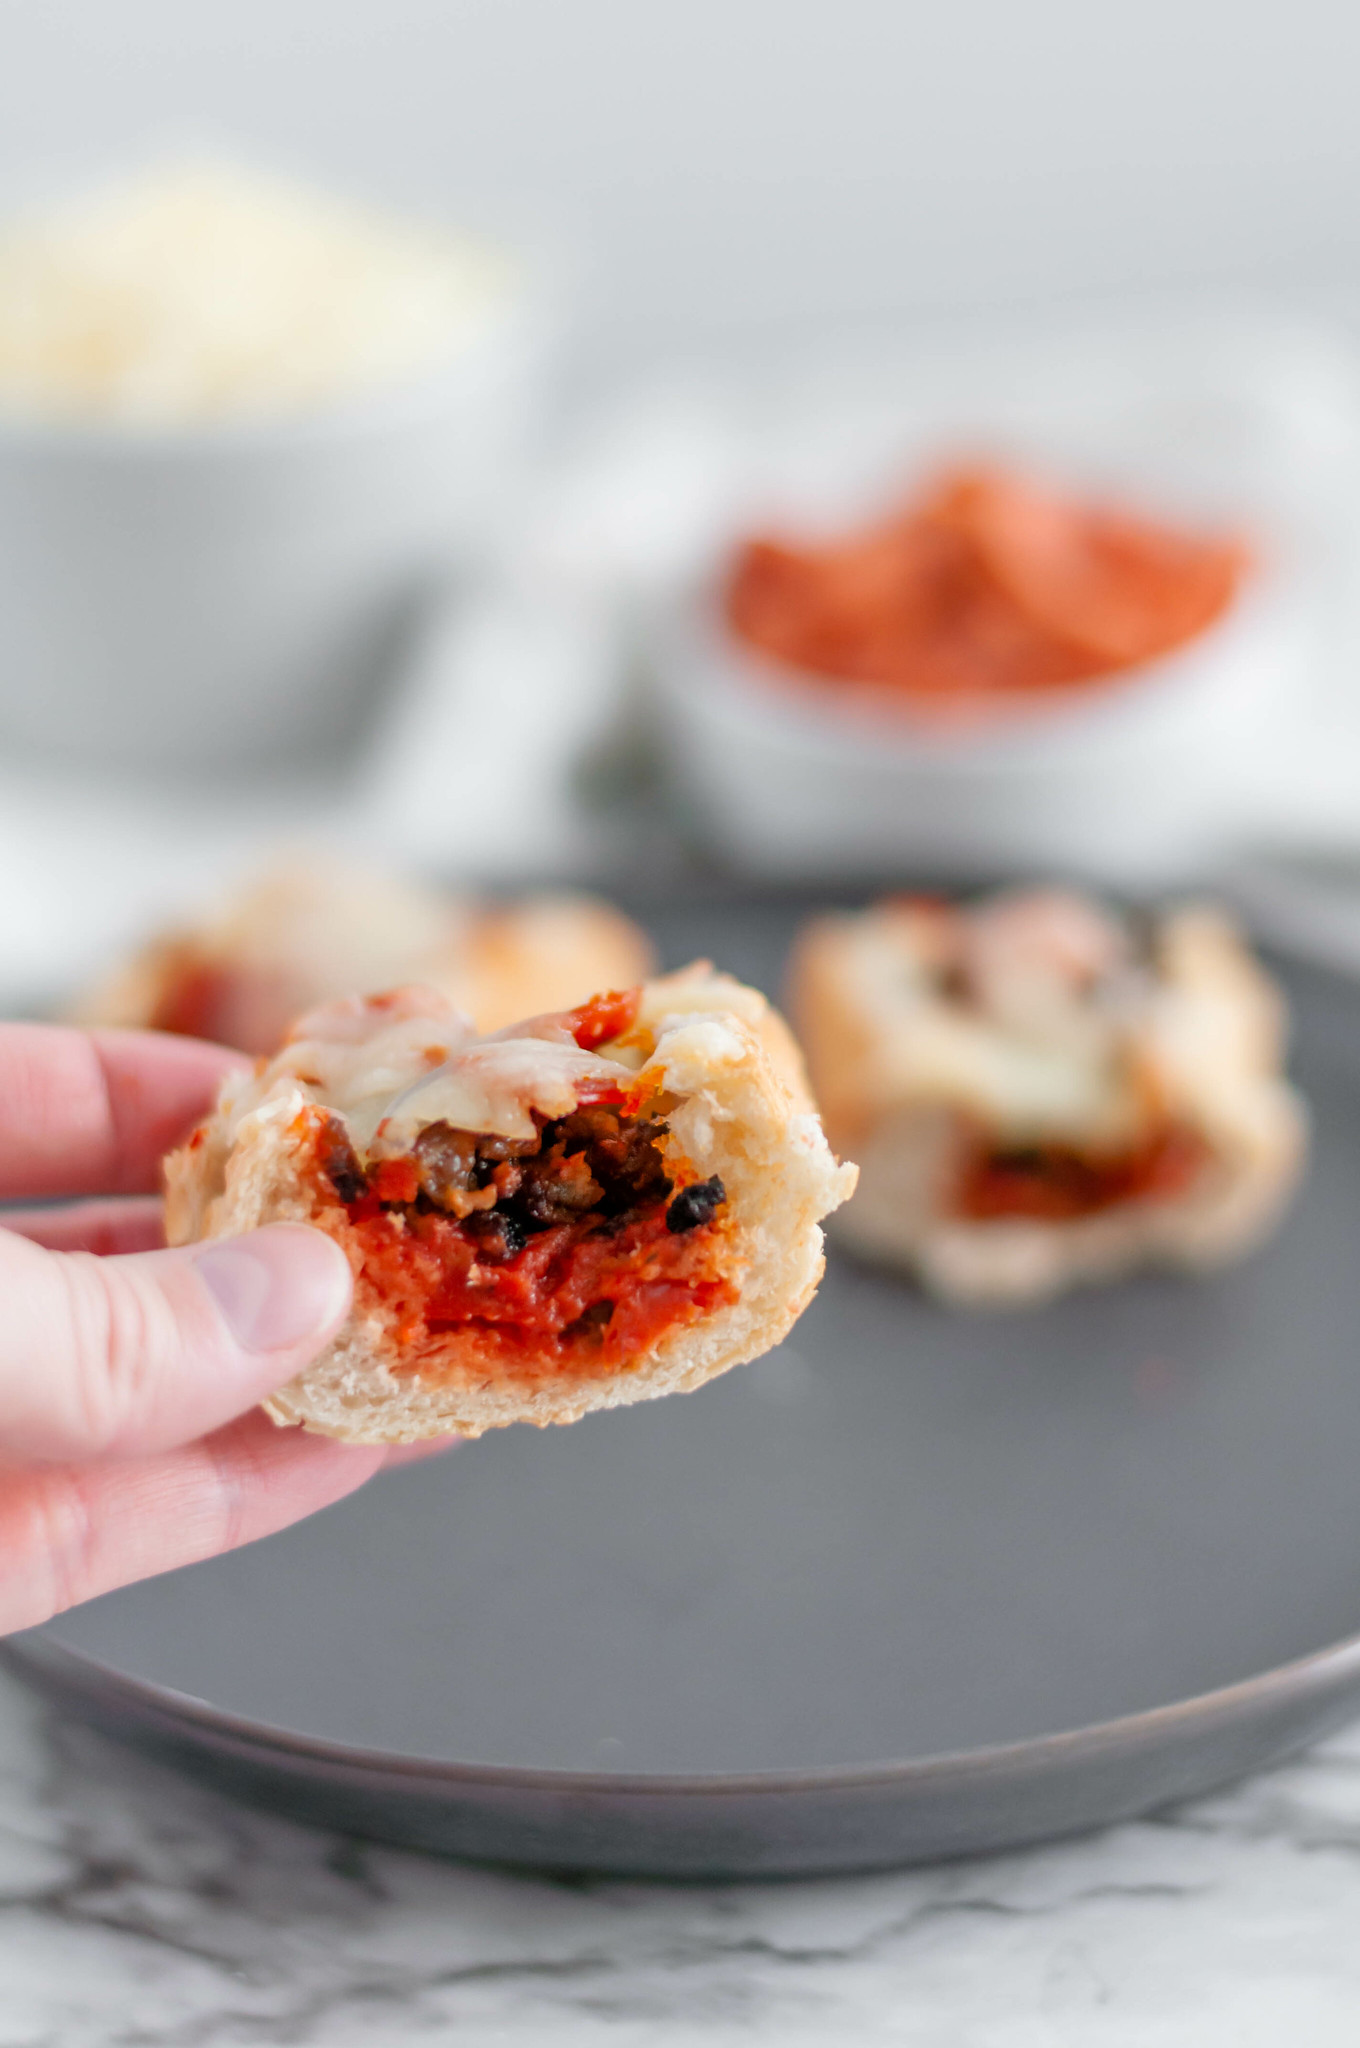 These French Bread Pizza Bites are a great option for the Super Bowl this year. French baguette is hollowed out & stuffed with your favorite pizza toppings.